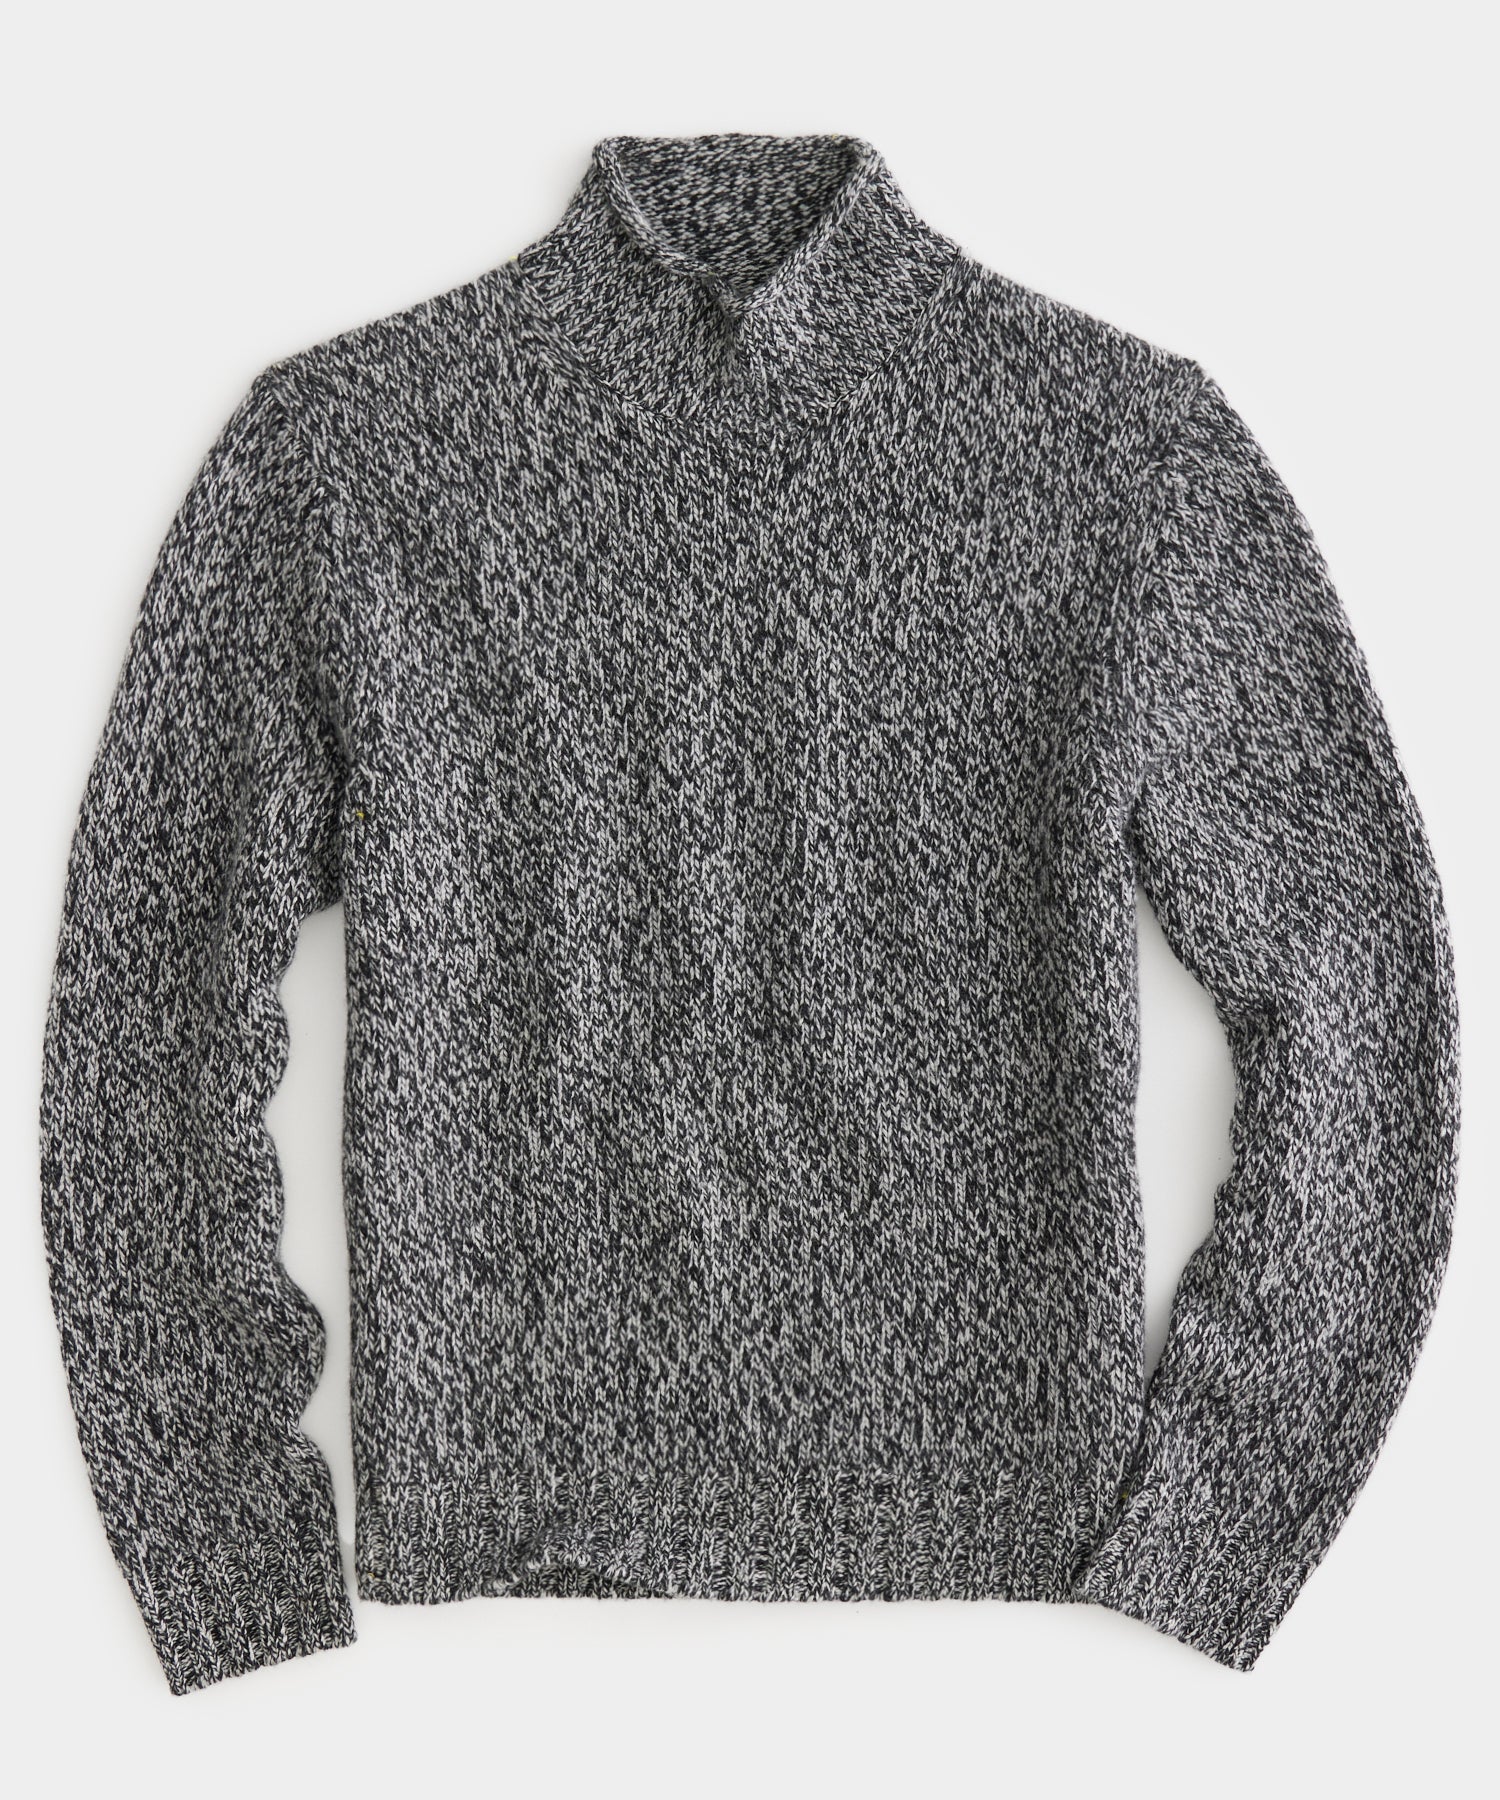 Roll Neck Sweater in Faded Black